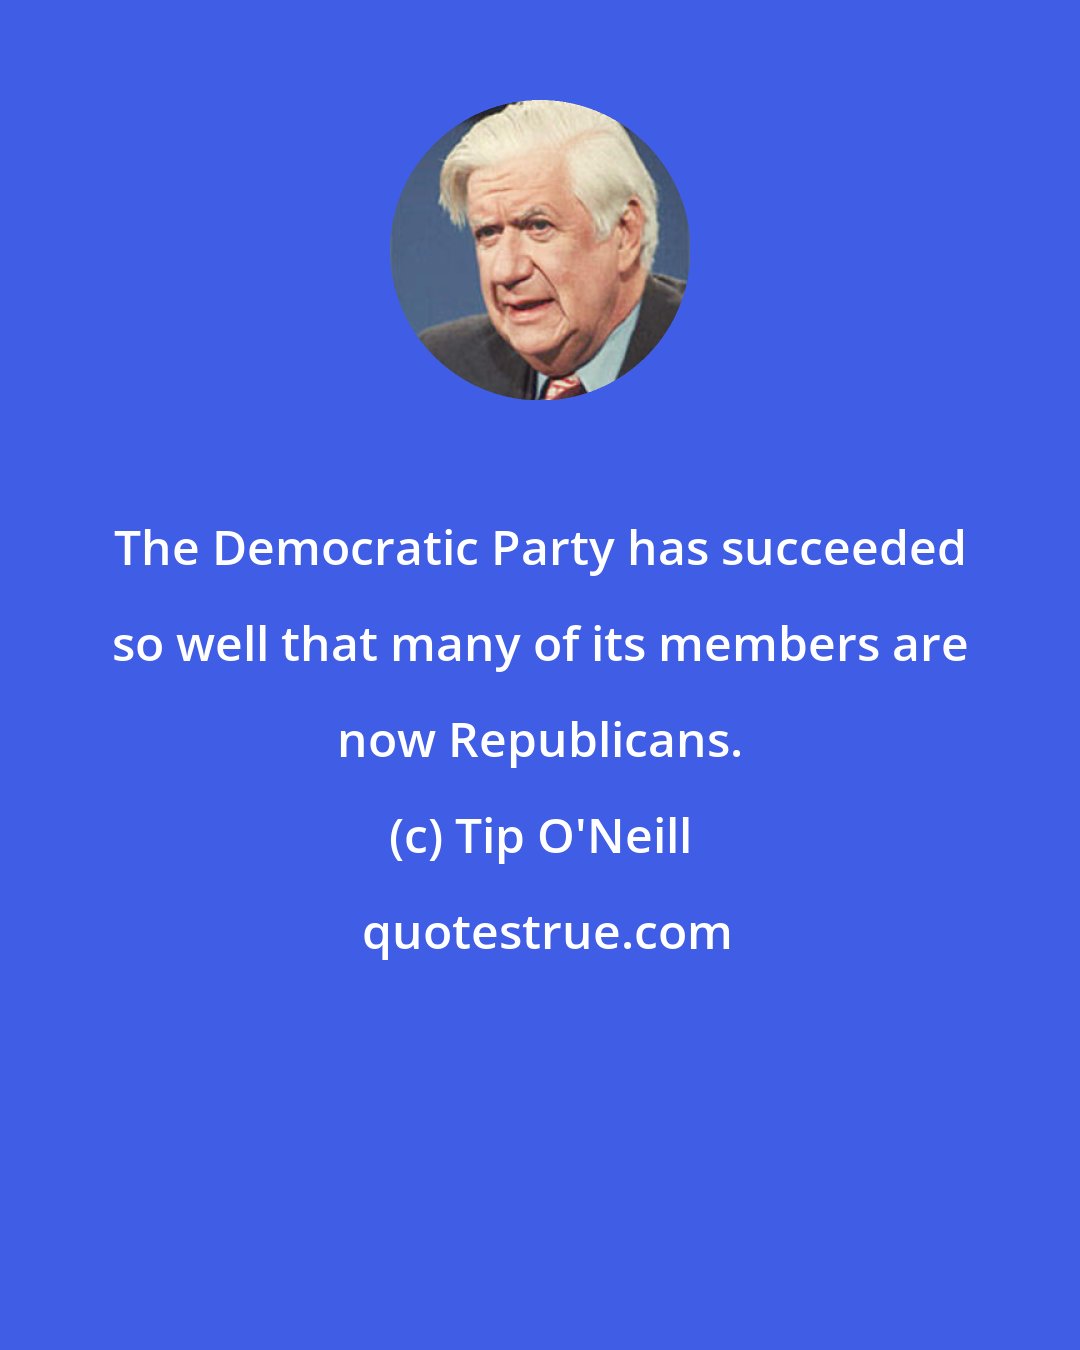 Tip O'Neill: The Democratic Party has succeeded so well that many of its members are now Republicans.